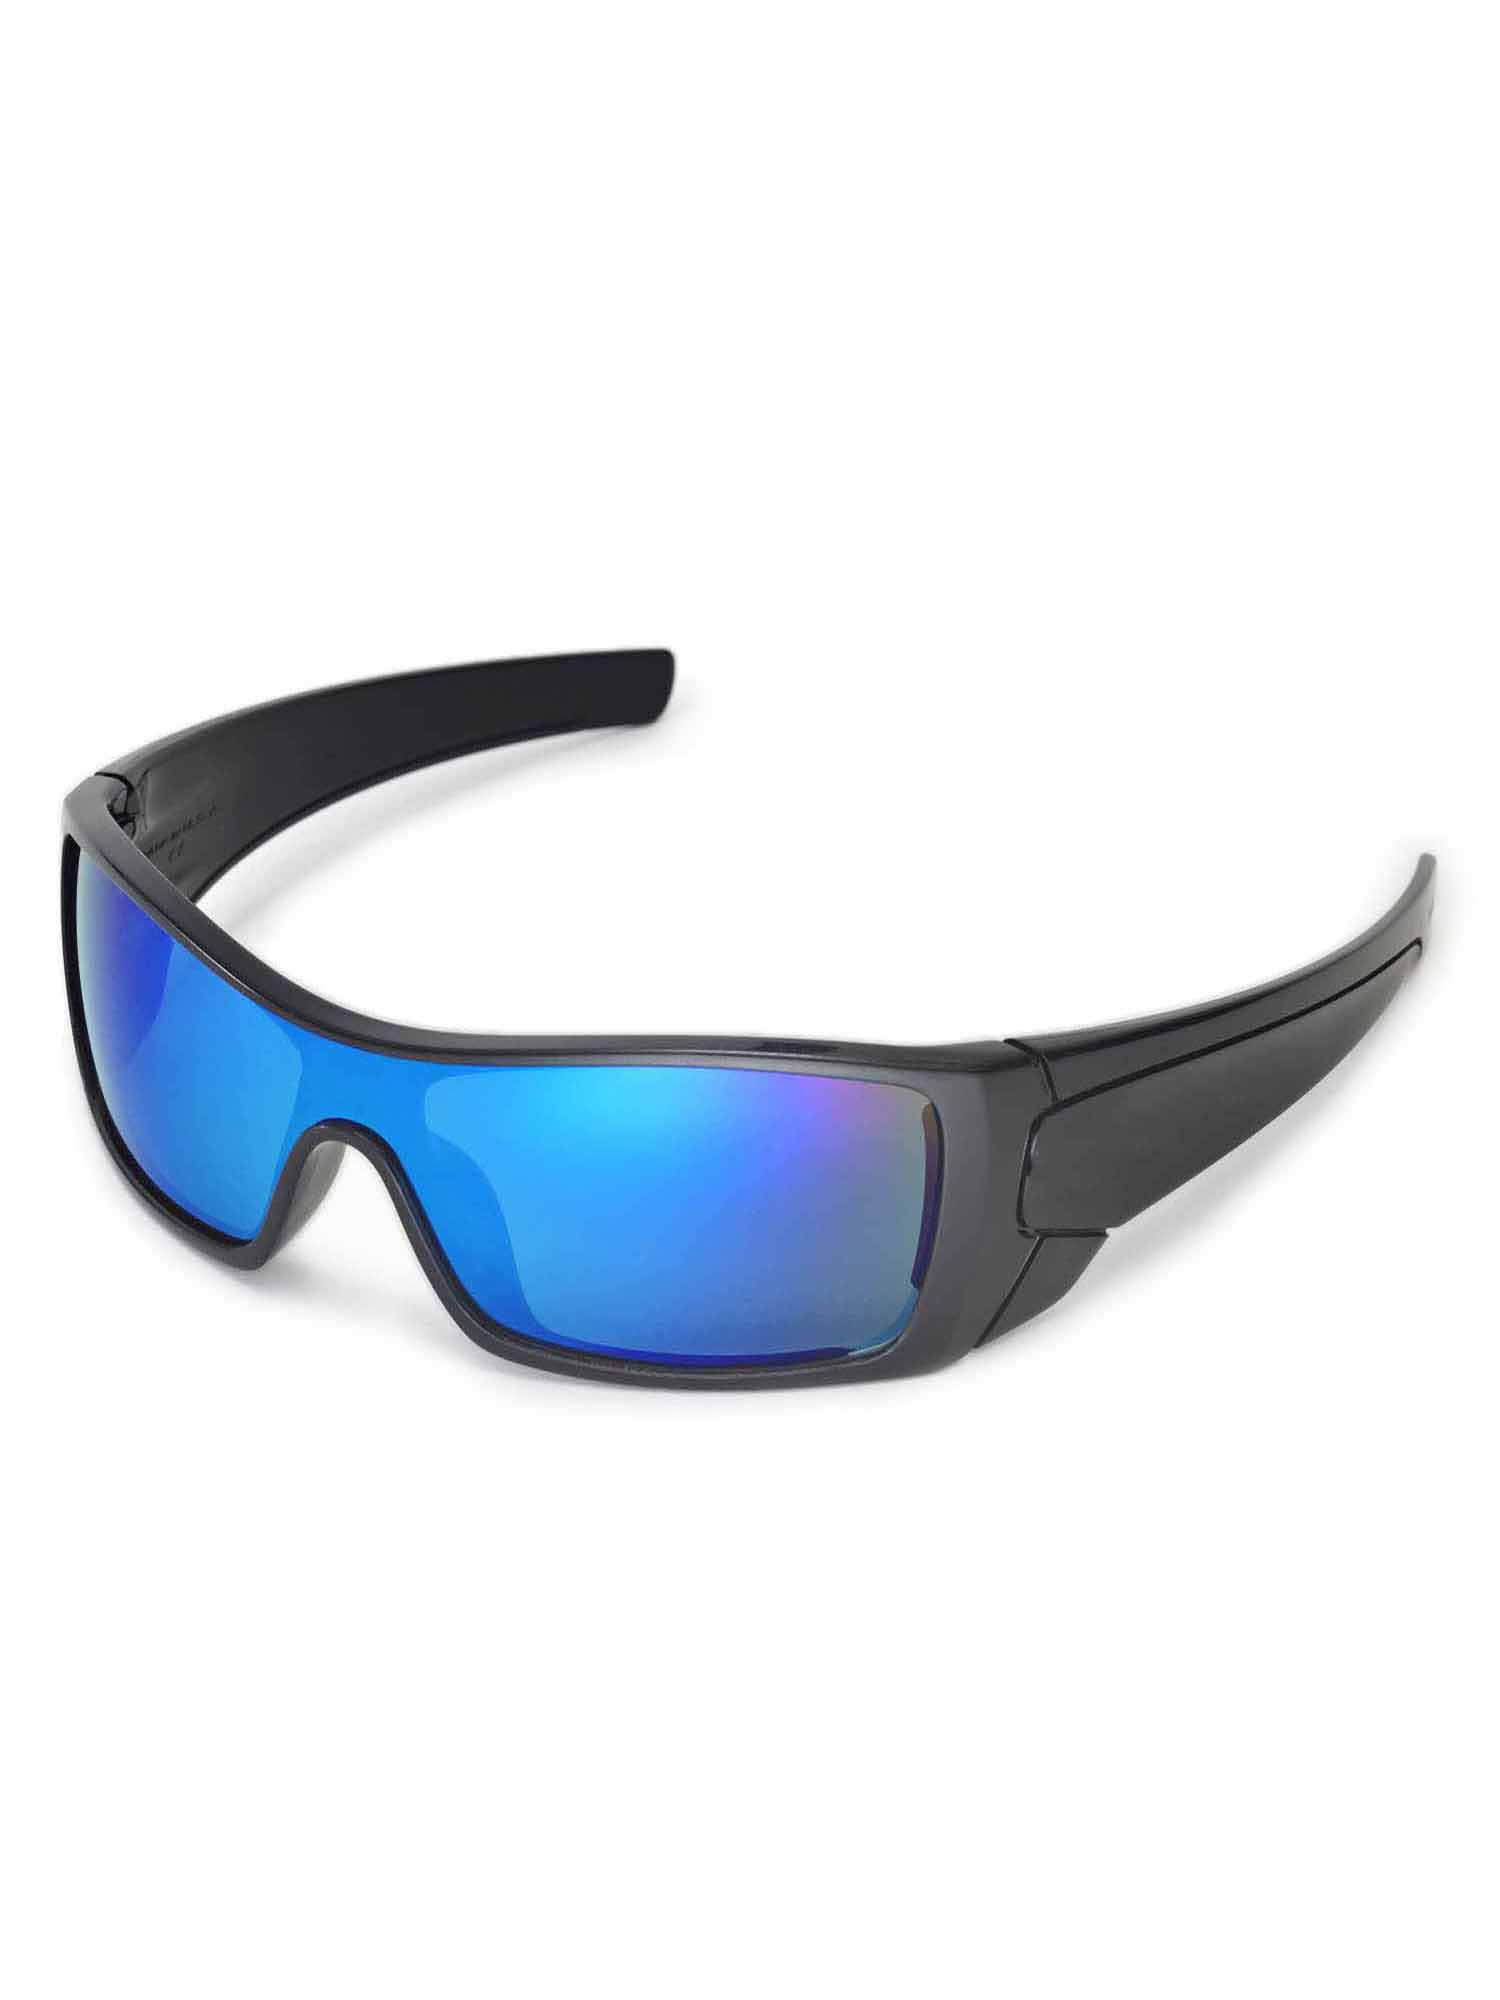 Walleva Ice Blue Polarized Replacement Lenses for Oakley Batwolf Sunglasses - image 7 of 7